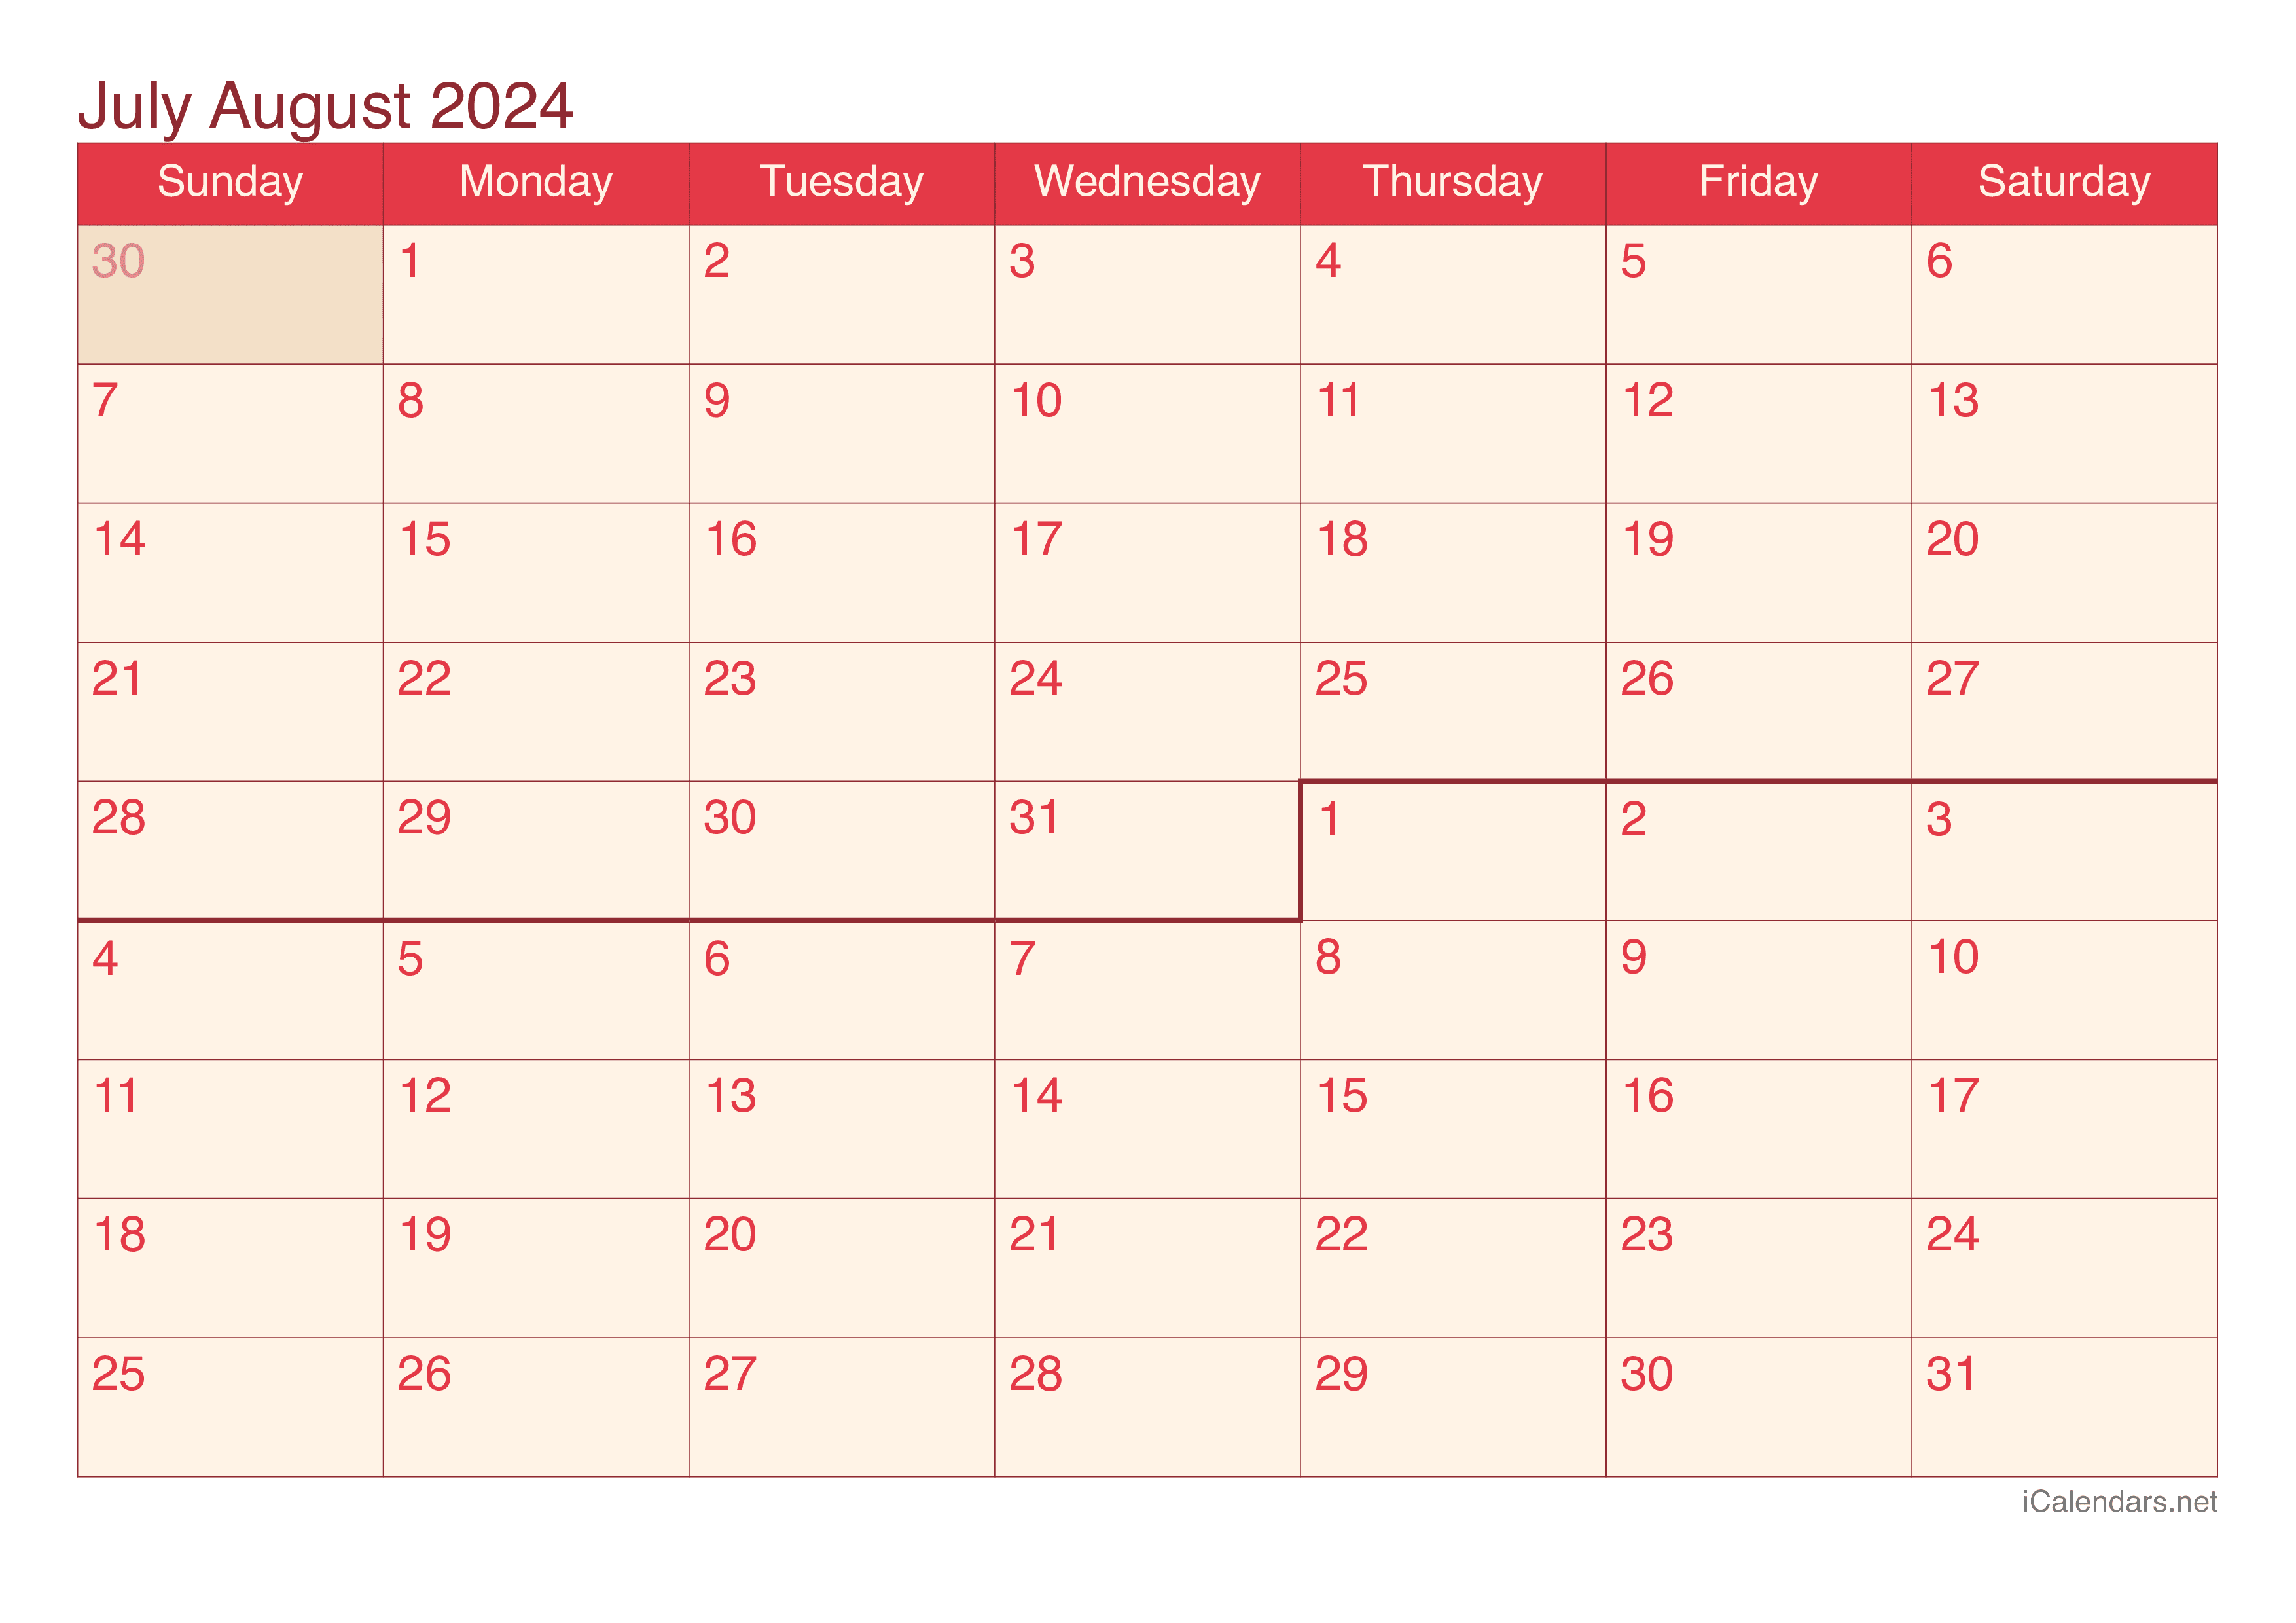 July And August 2024 Printable Calendar within Calendar For July August 2024